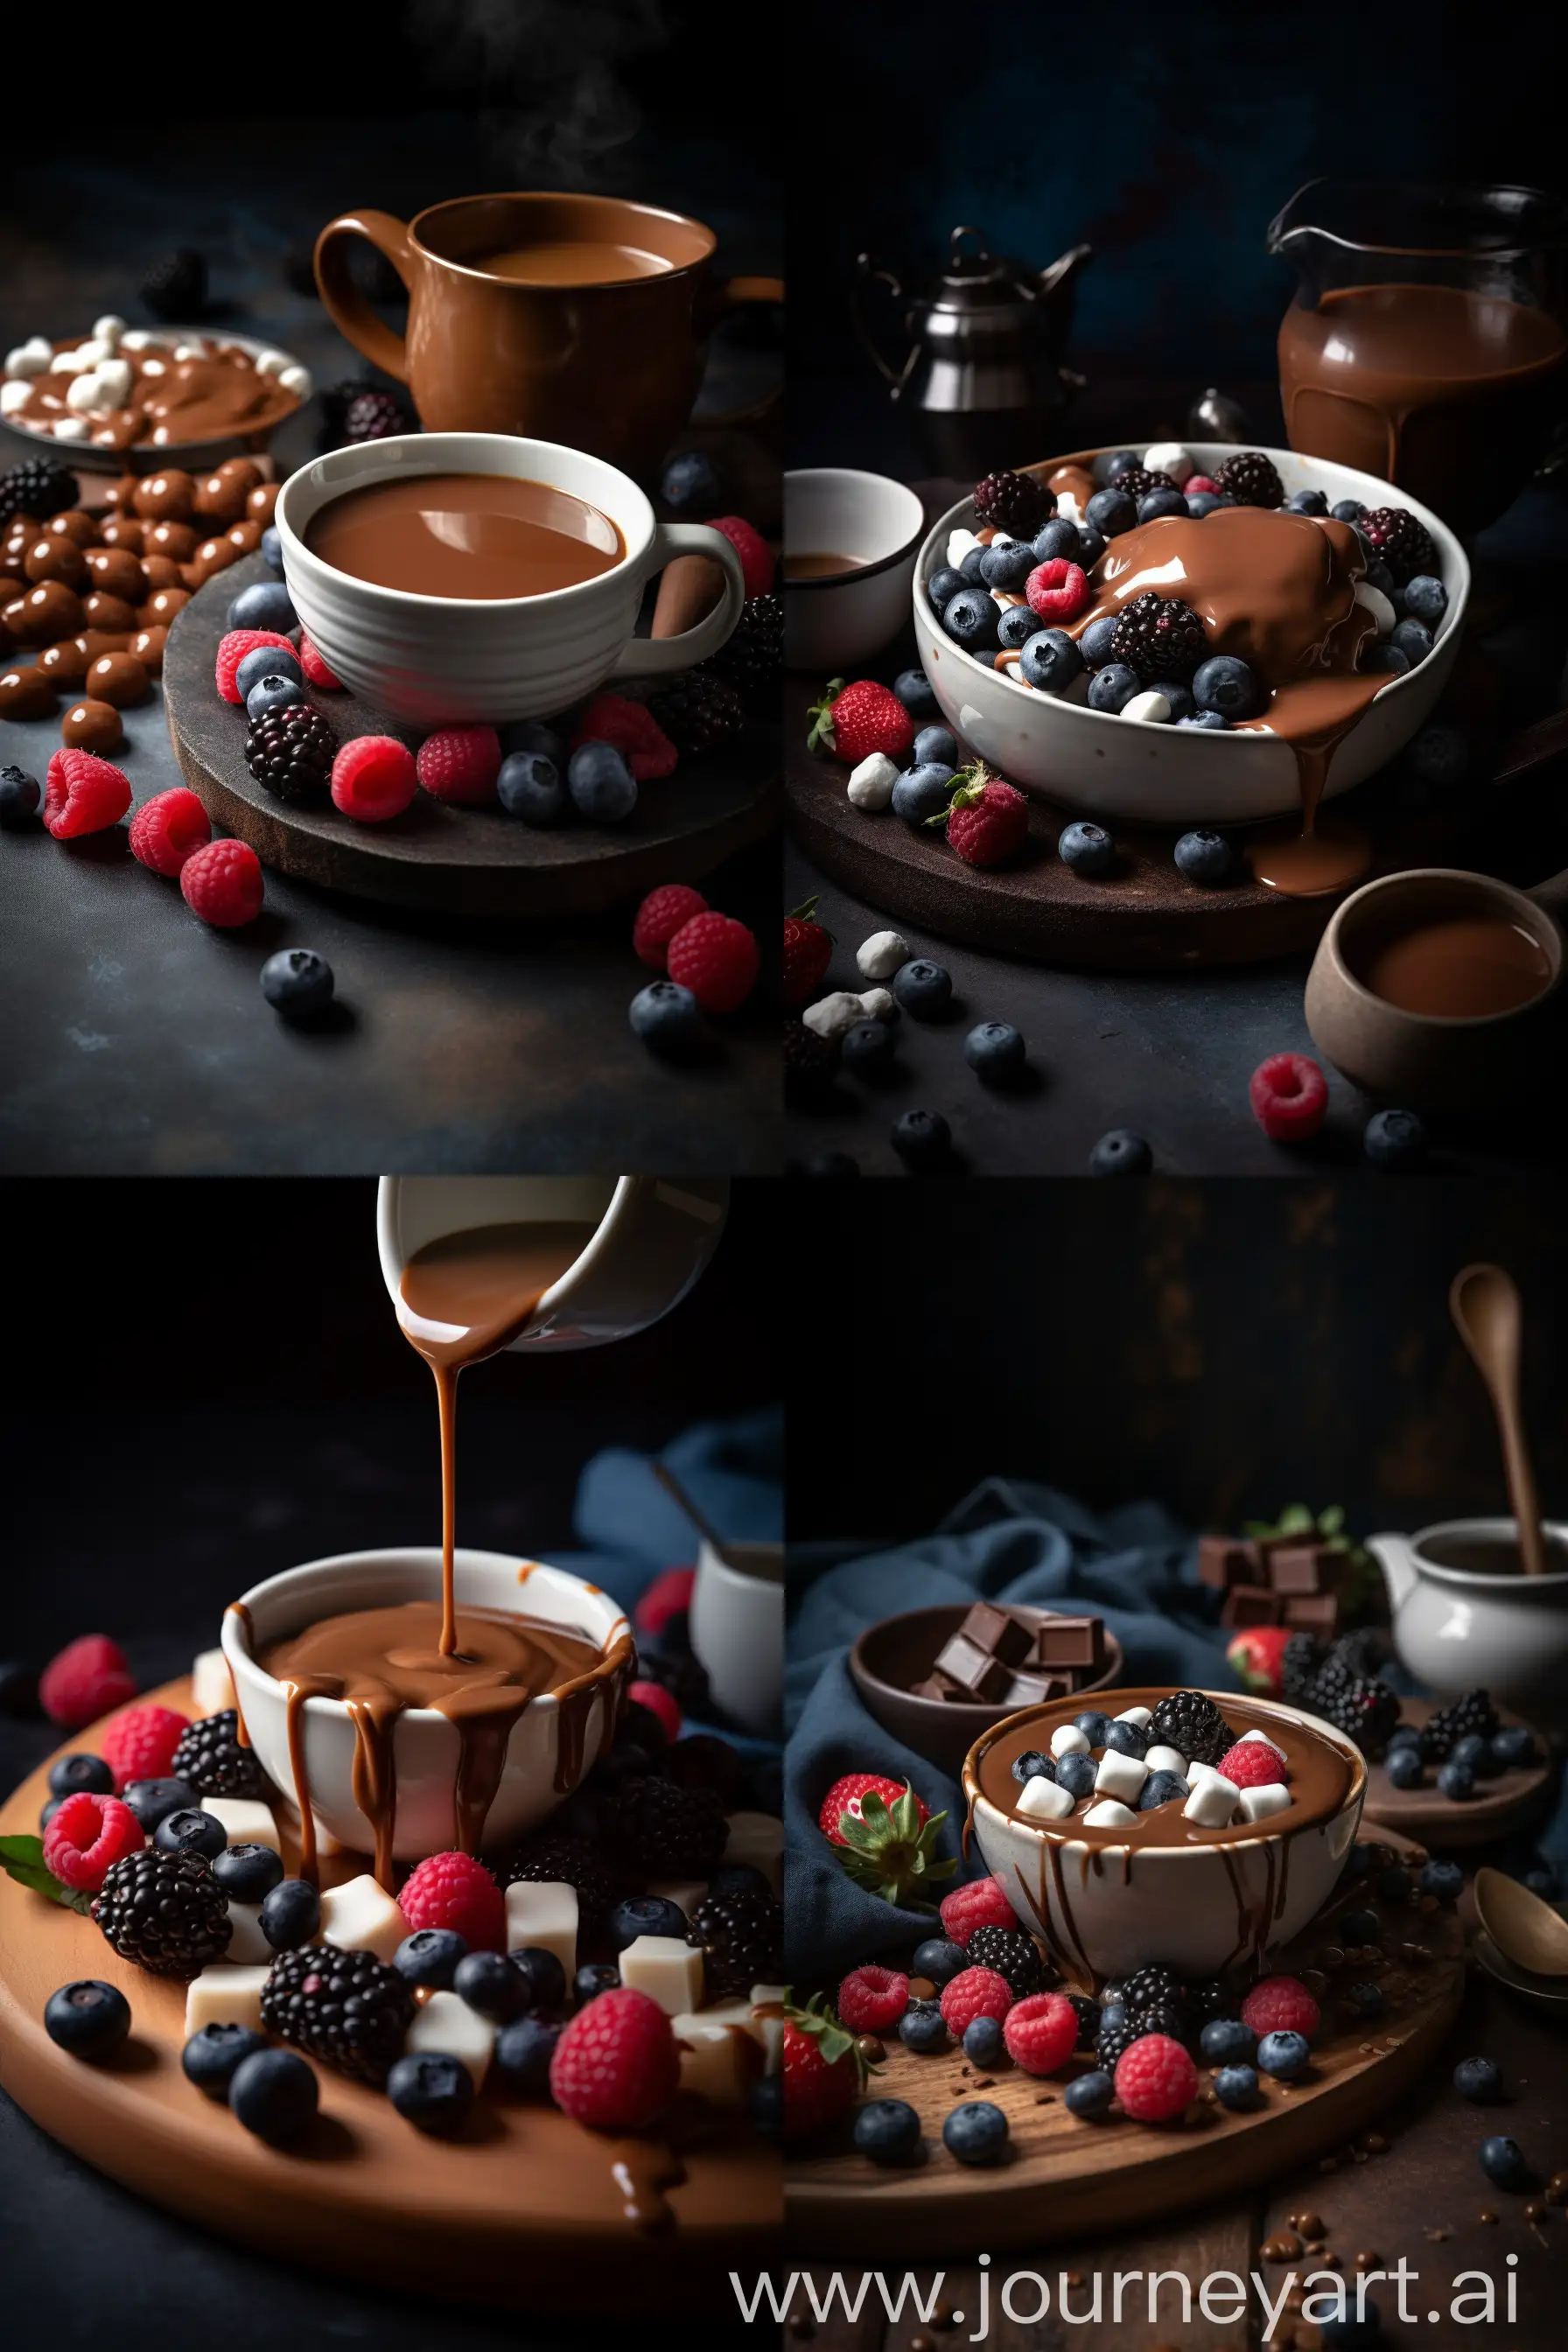 Decadent-Chocolate-Salad-with-Marshmallows-and-Berries-CloseUp-Professional-Photography